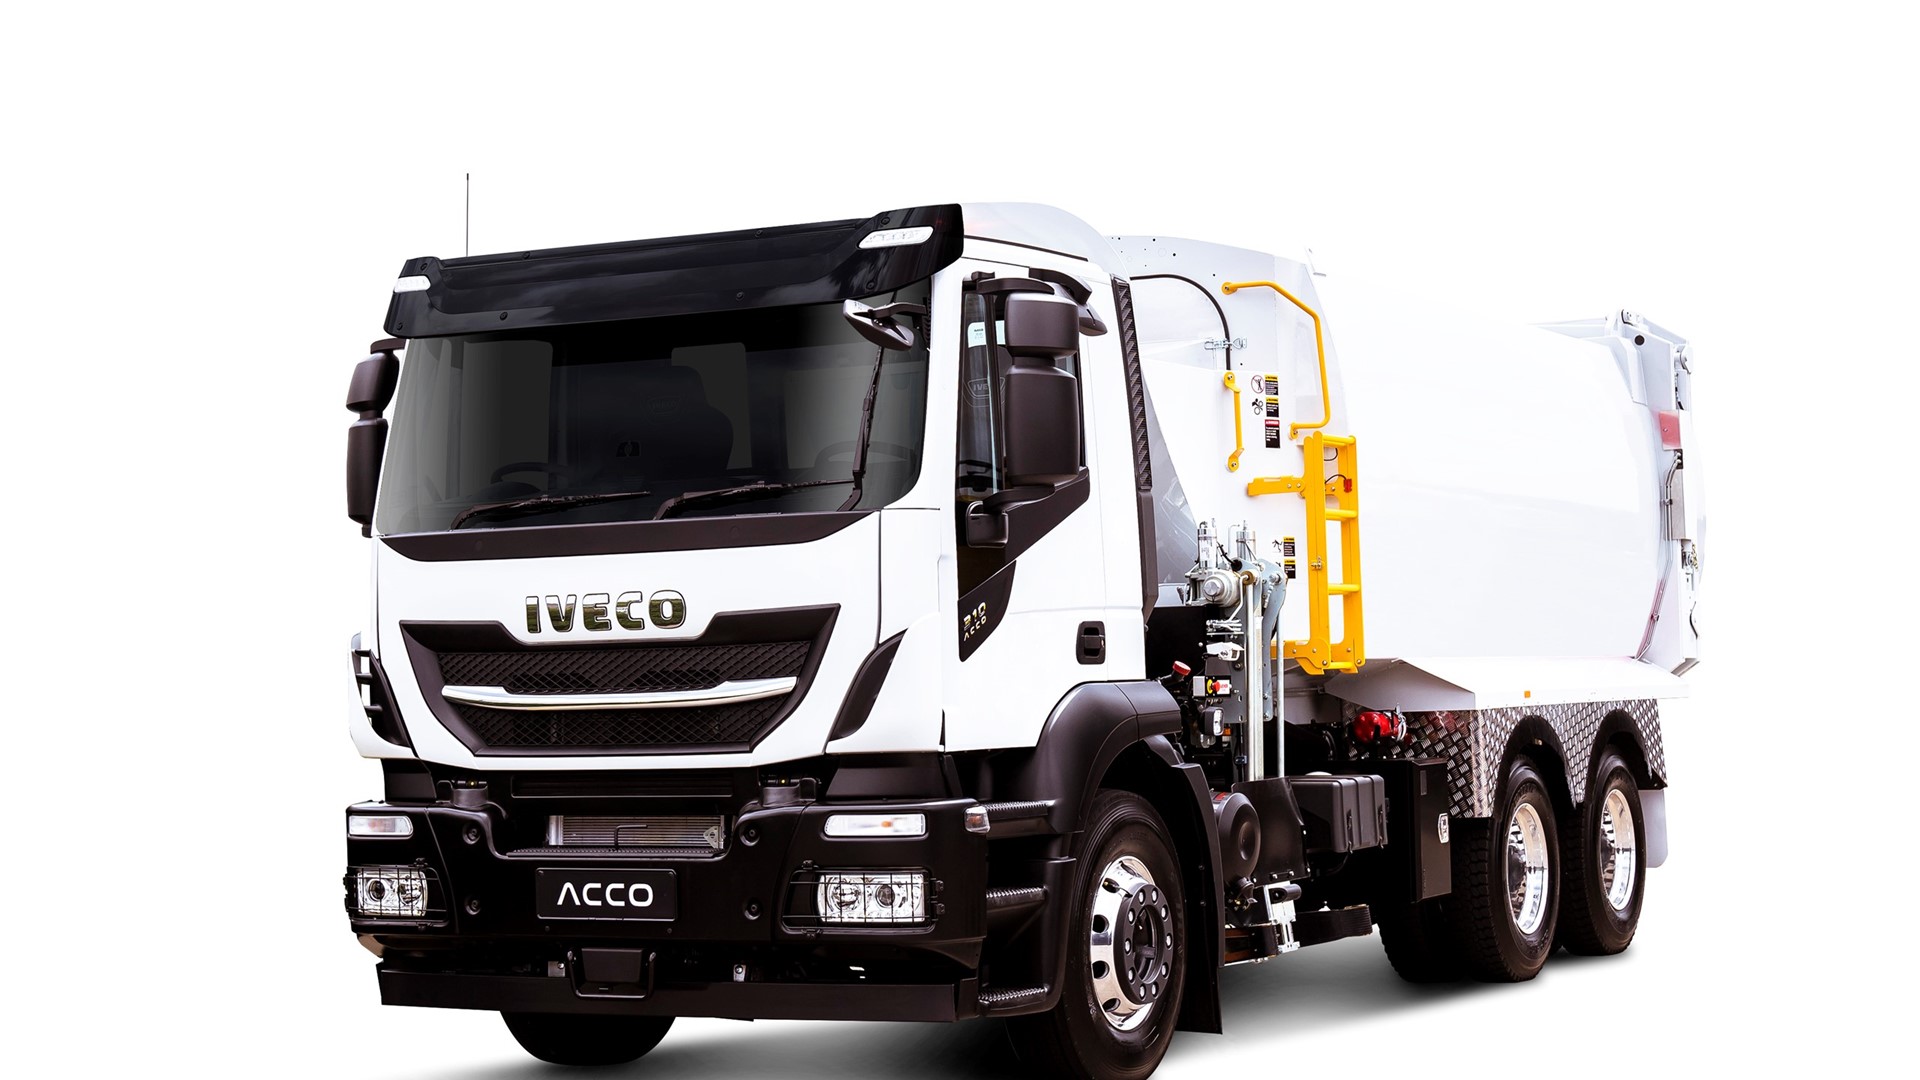 Power, efficiency, cleaner running Euro6 engines and advanced safety are all hallmarks of the new Euro6 ACCO